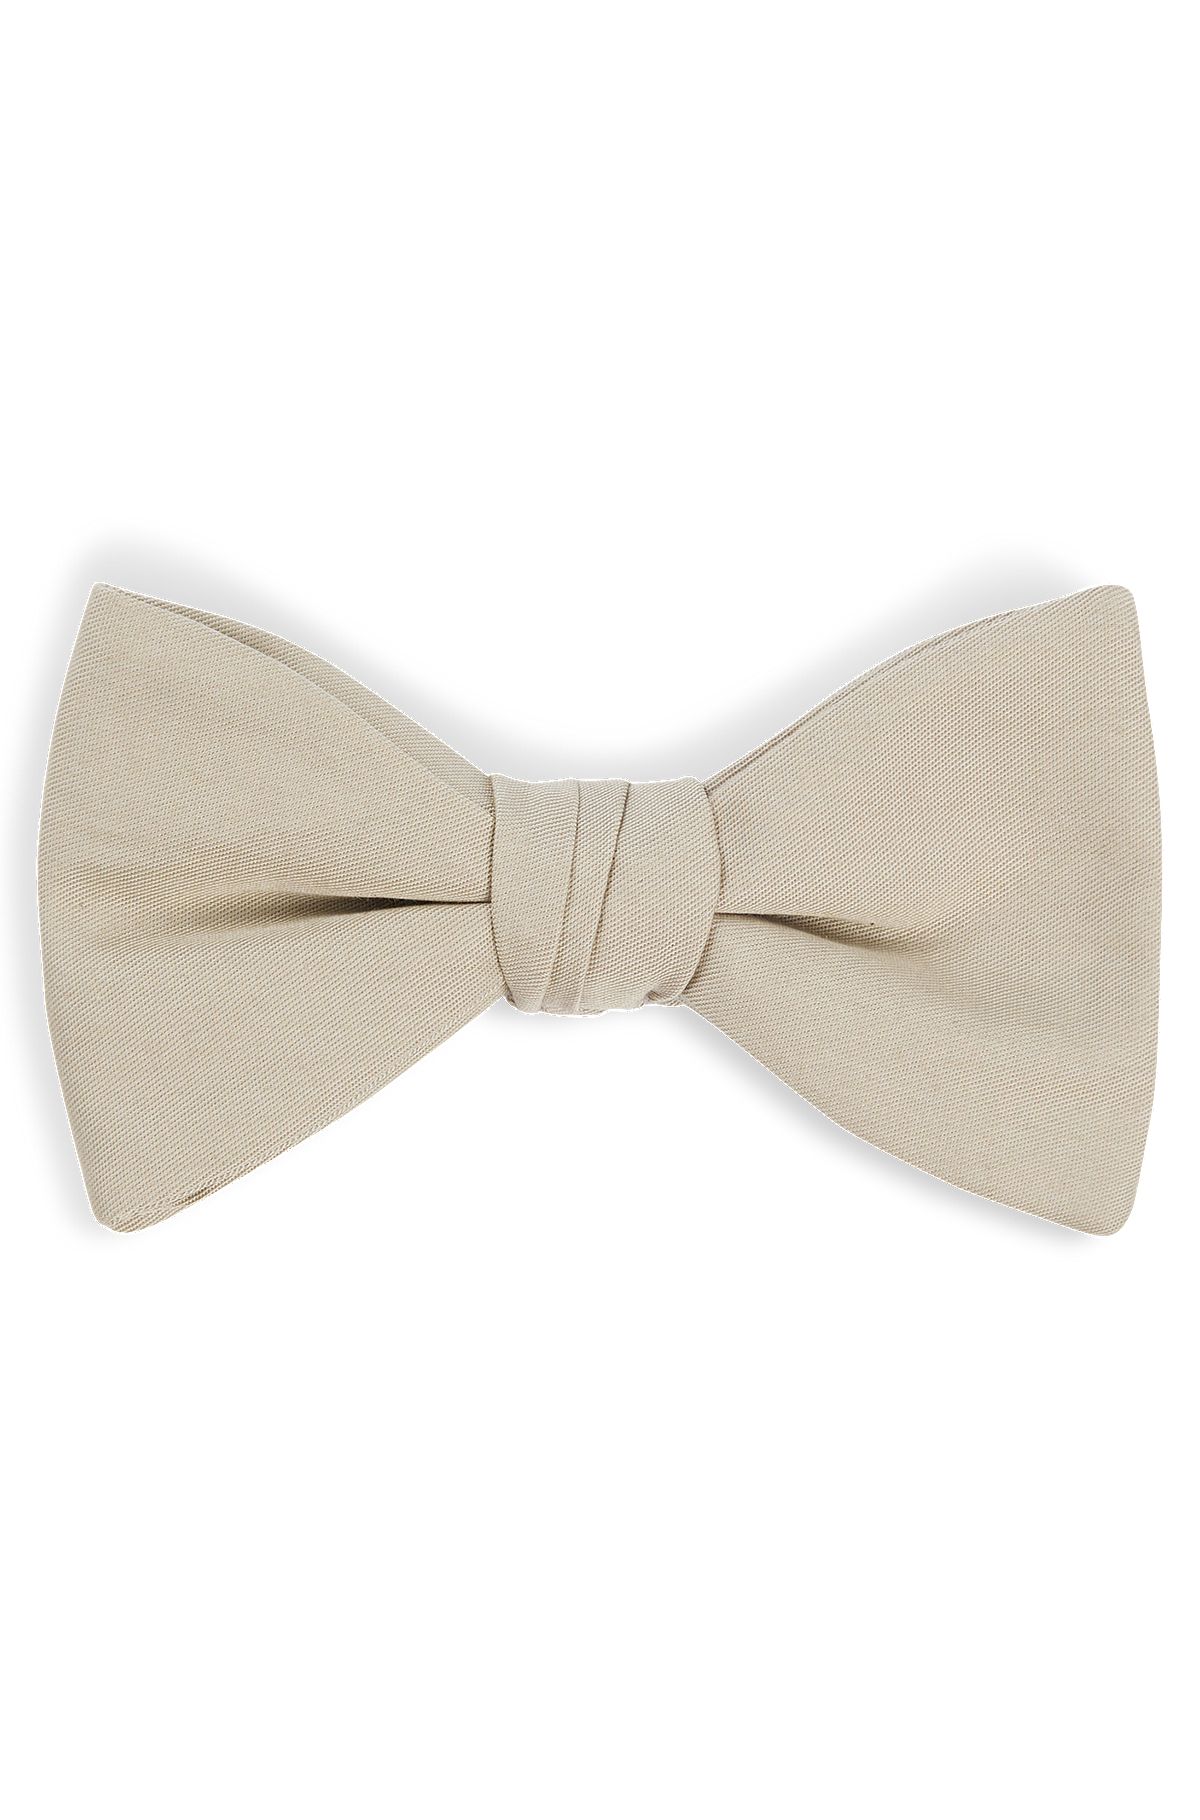 Bow tie in cotton jacquard, Light Grey